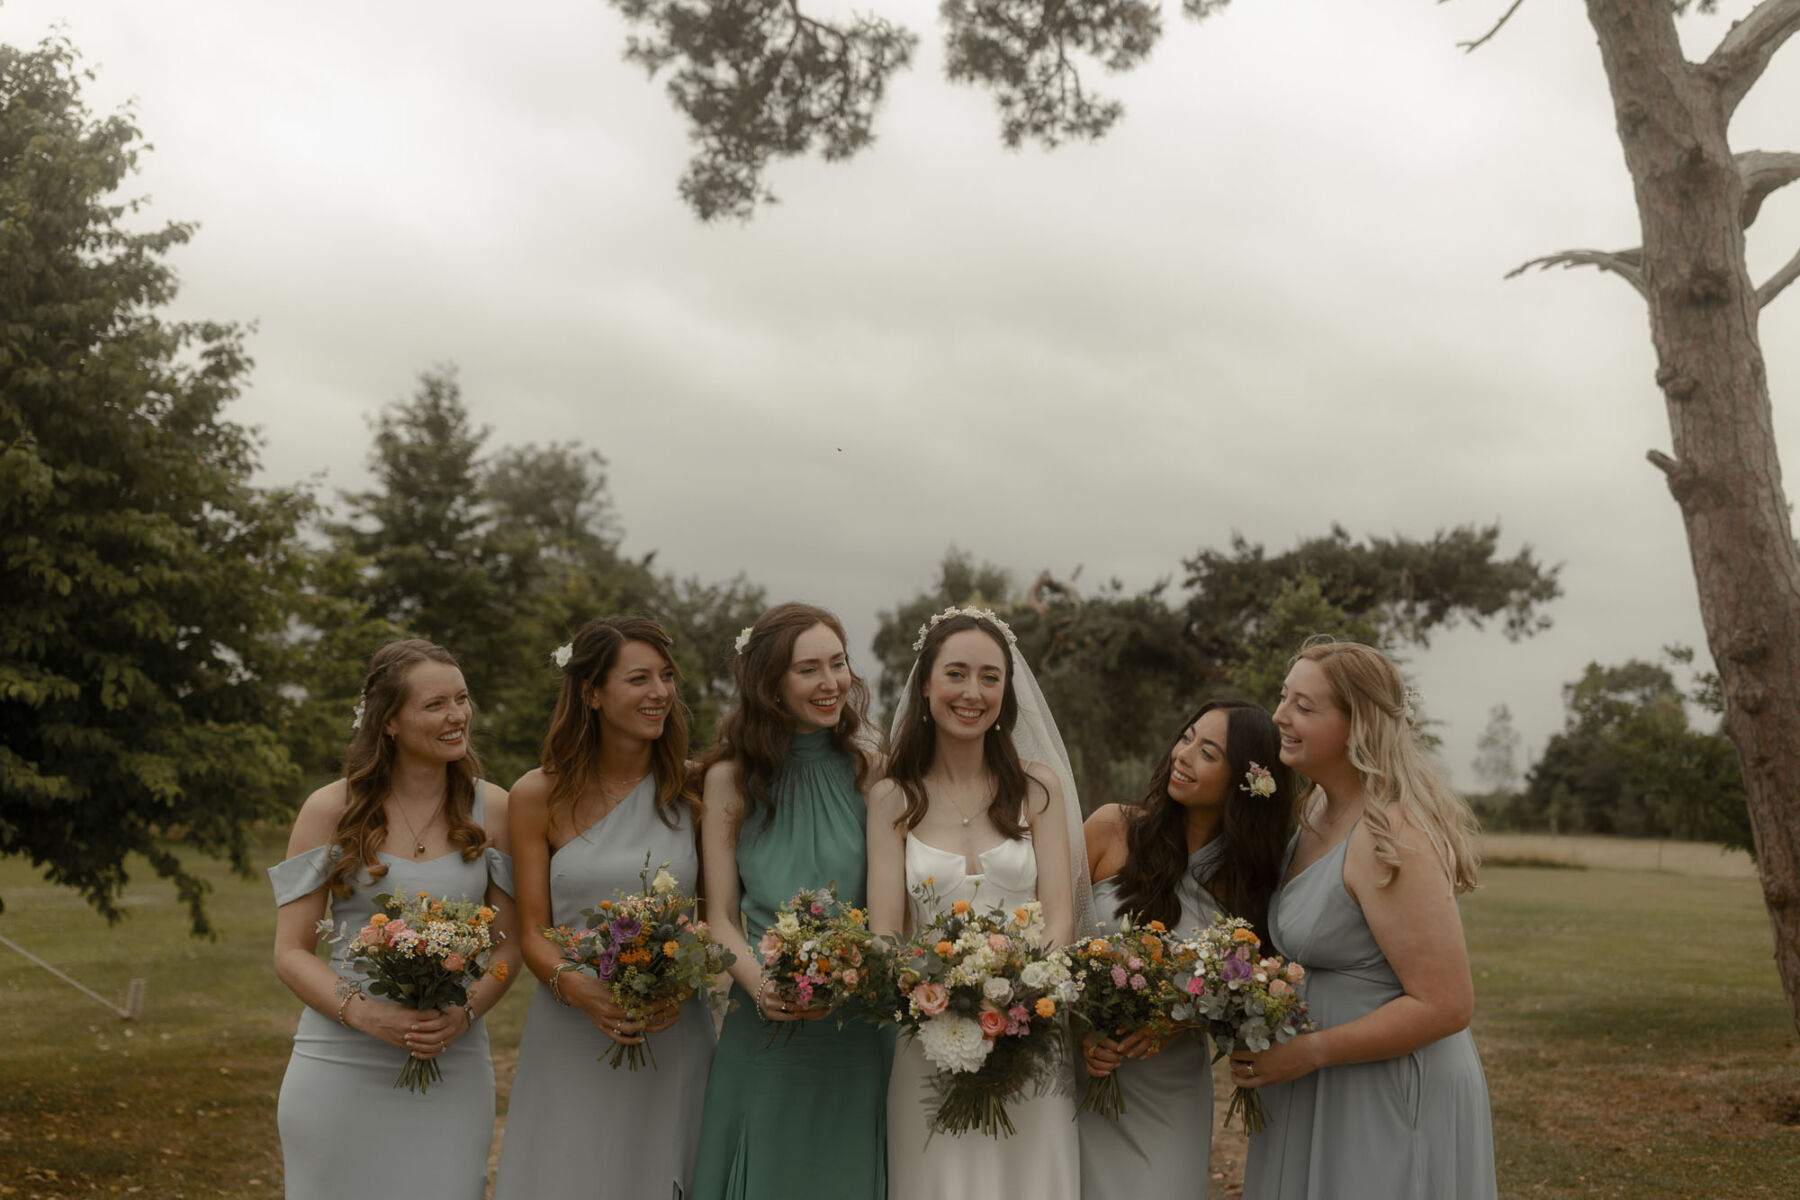 Bridesmaids in pale blue and green dresses.